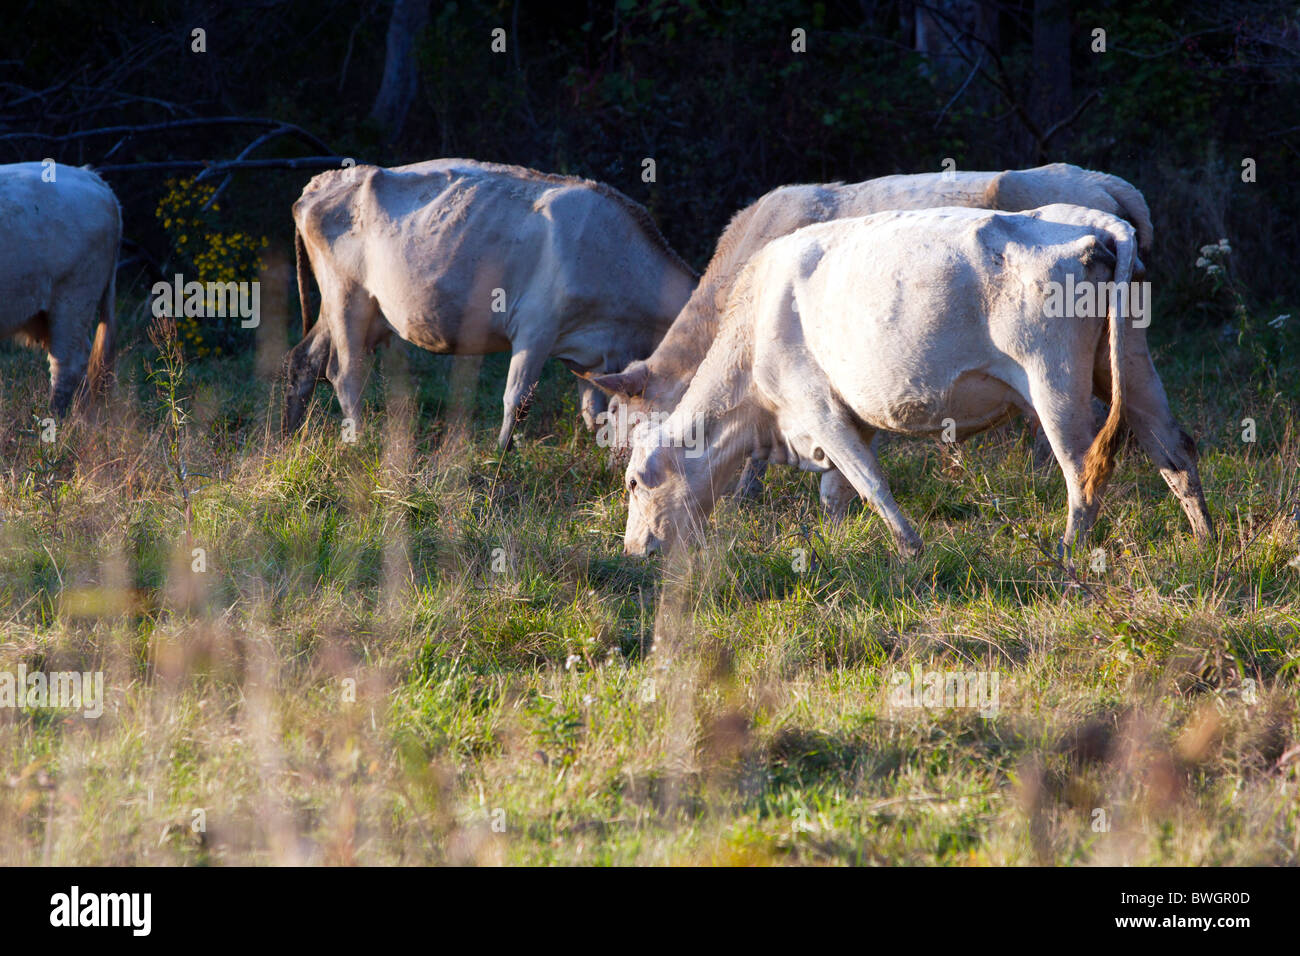 A herd of white Charolais cattle graze on green grass in a small pasture in Illinois. Stock Photo